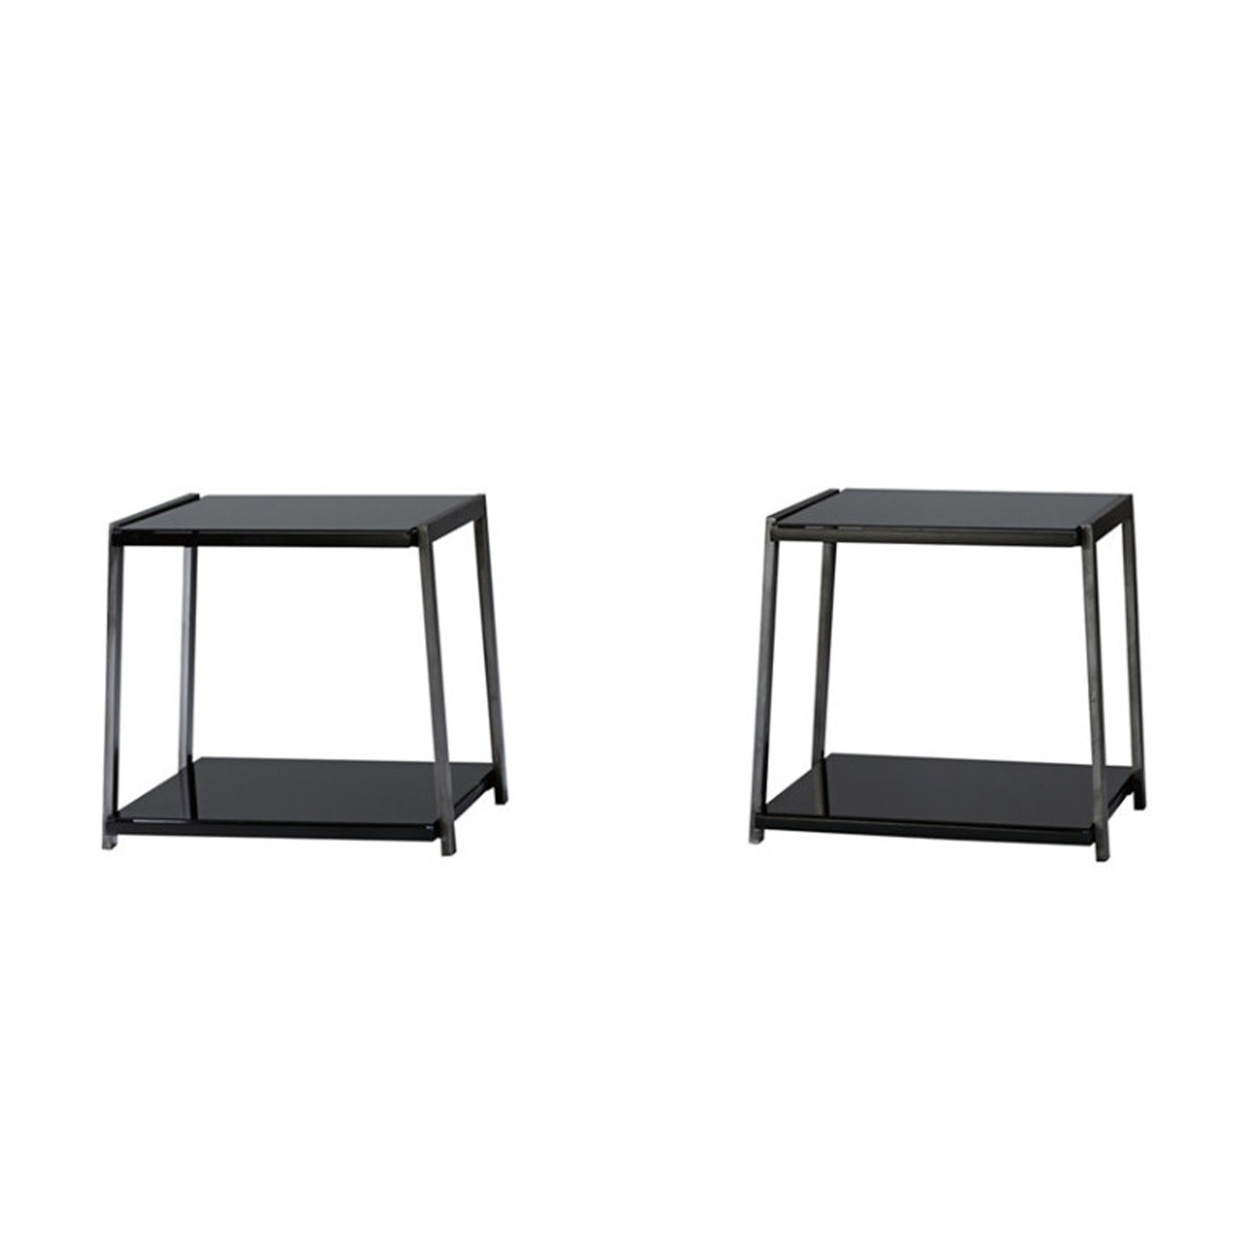 Metal Framed Table Set With Tempered Glass Top And Lower Shelf, Set Of Three, Black And Silver- Saltoro Sherpi